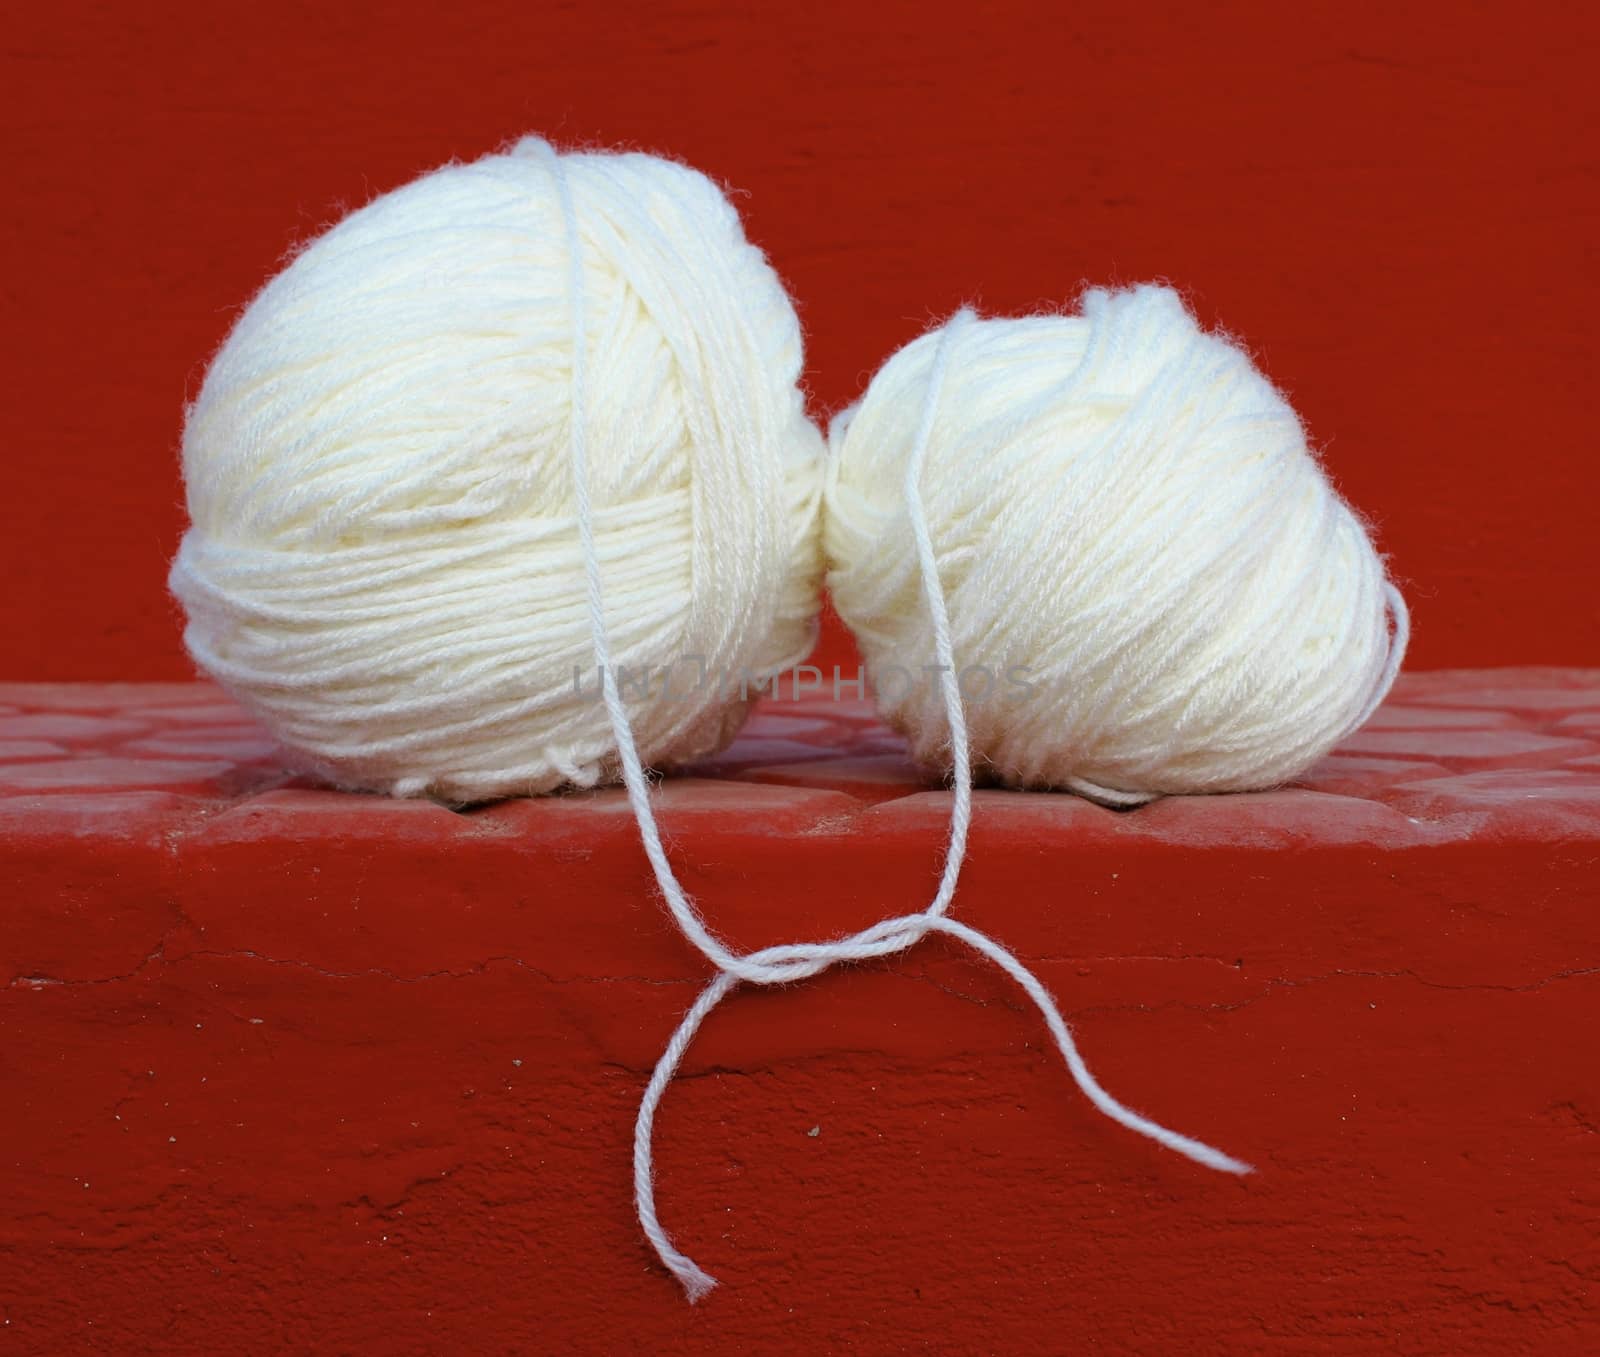 Two white wool yarn balls with their treads tied up in a knot, shot against a red concrete steps background. It can be used for relationship concepts like -love, togetherness, connection, and for business concepts like - mergers, joint venture etc. 
